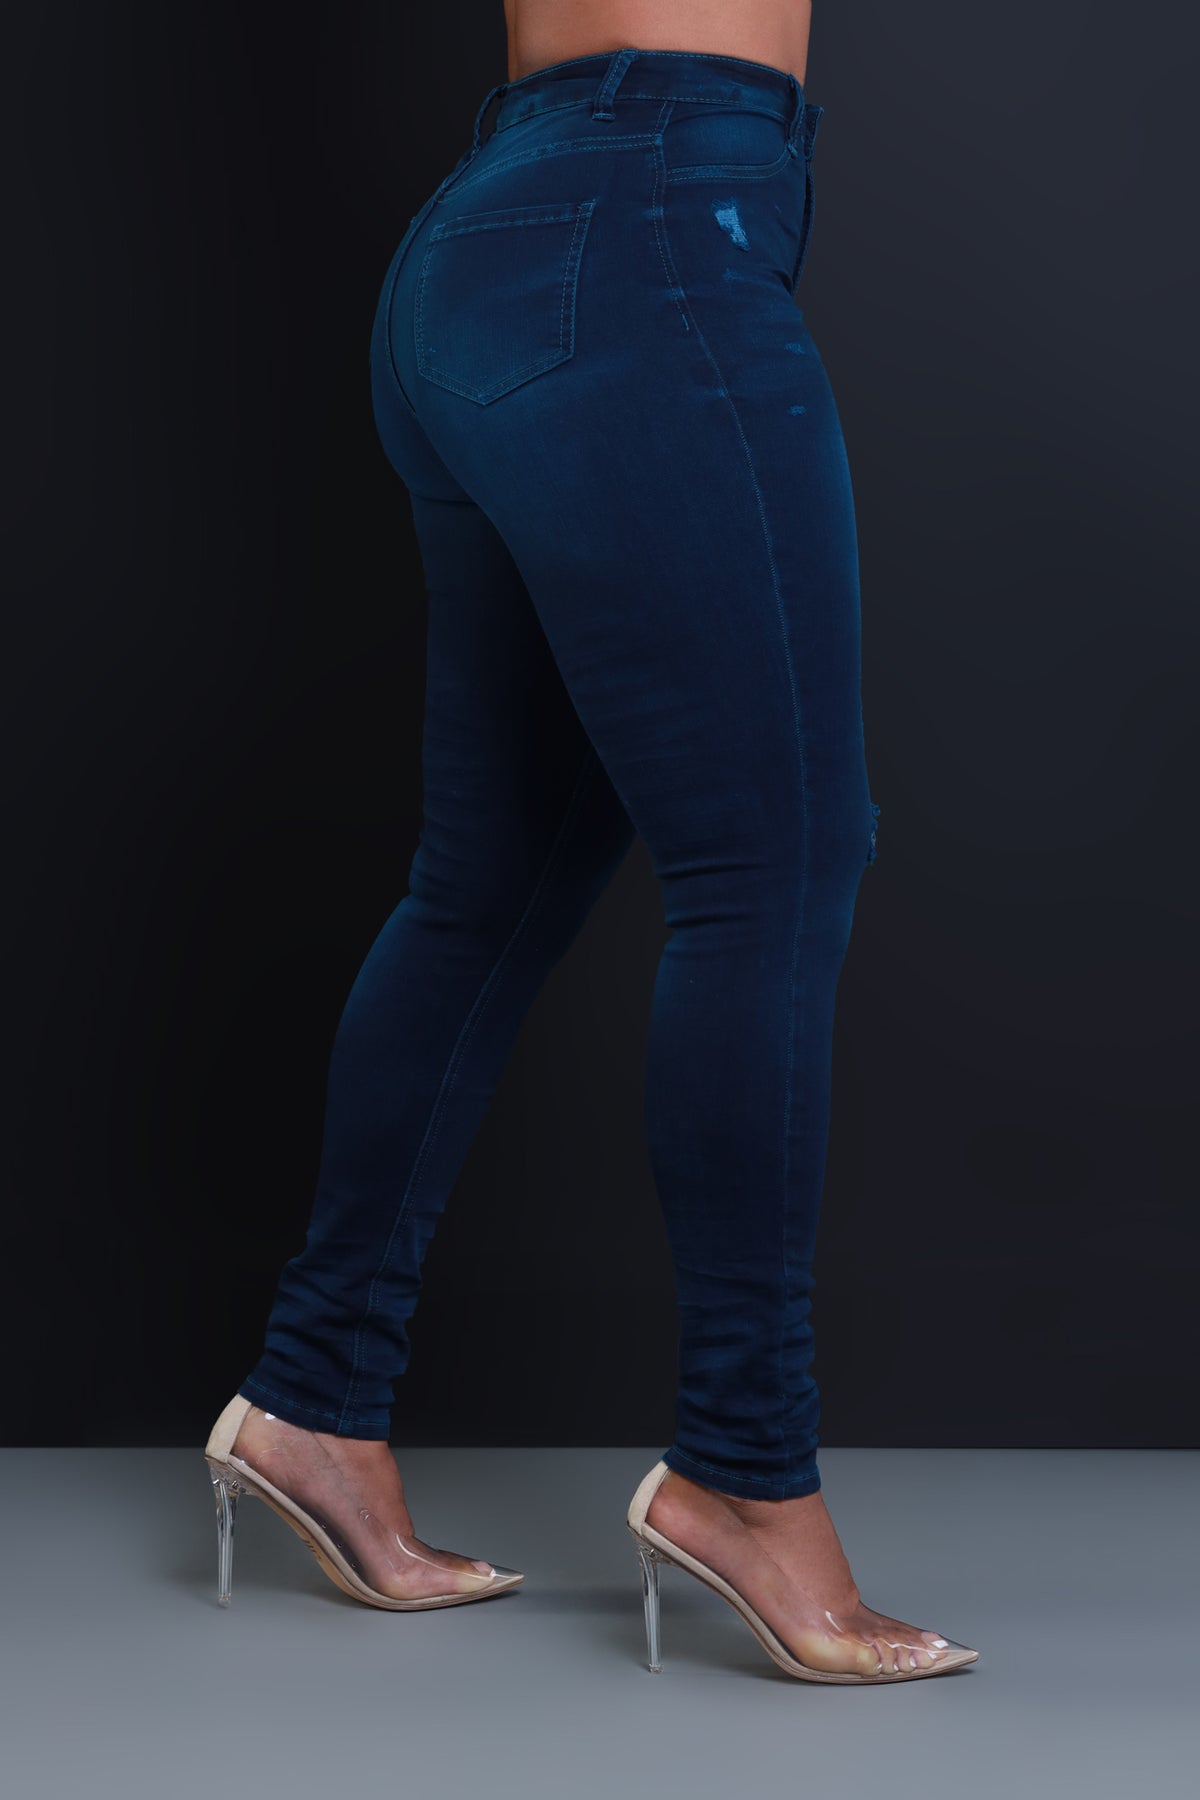 
              On Your Mind Distressed Skinny Jeans - Teal Wash - Swank A Posh
            